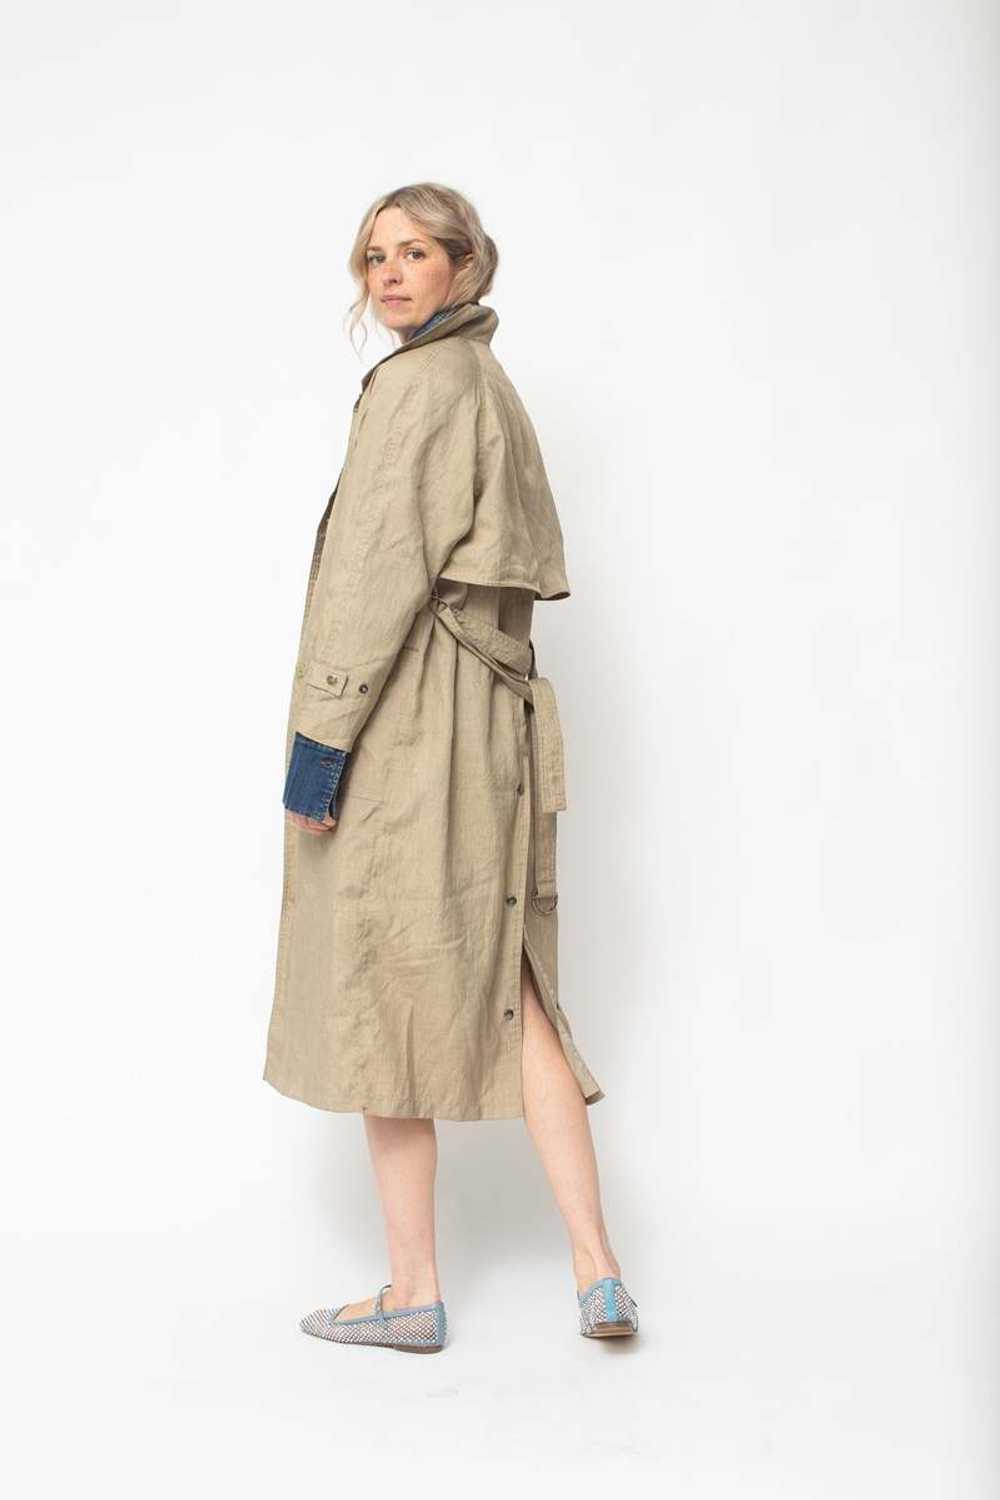 VINTAGE Lightweight Trench - Tan - image 5